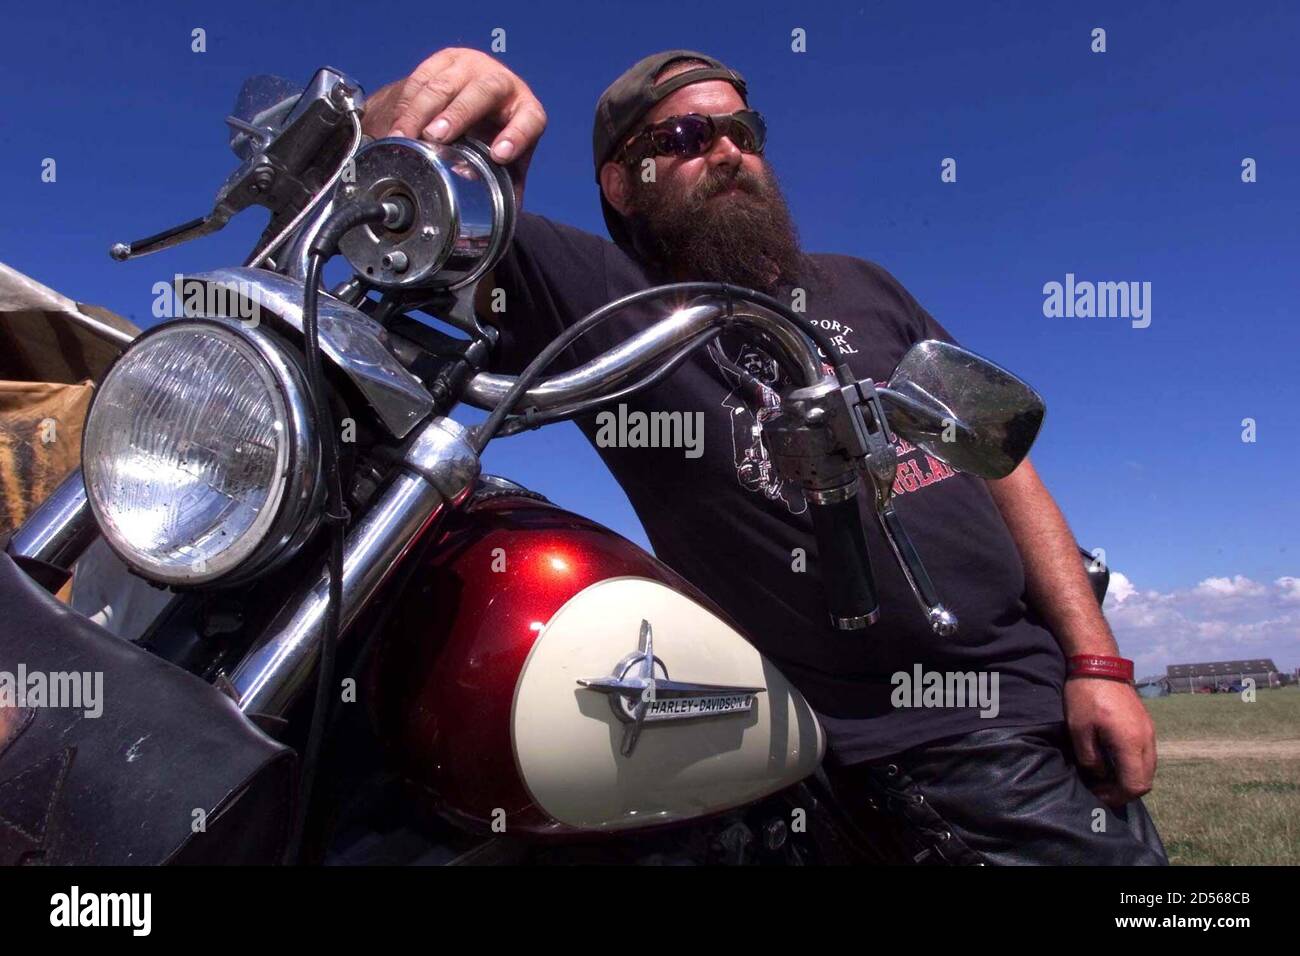 A Hells Angel biker leans on his Harley Davidson at The Bulldog Bash at Long Marston airfield in Warwickshire August 5. The event which is the largest of its kind in Europe is expected to attract around 40,000 bikers over the four day festival.  IH/JRE Stock Photo